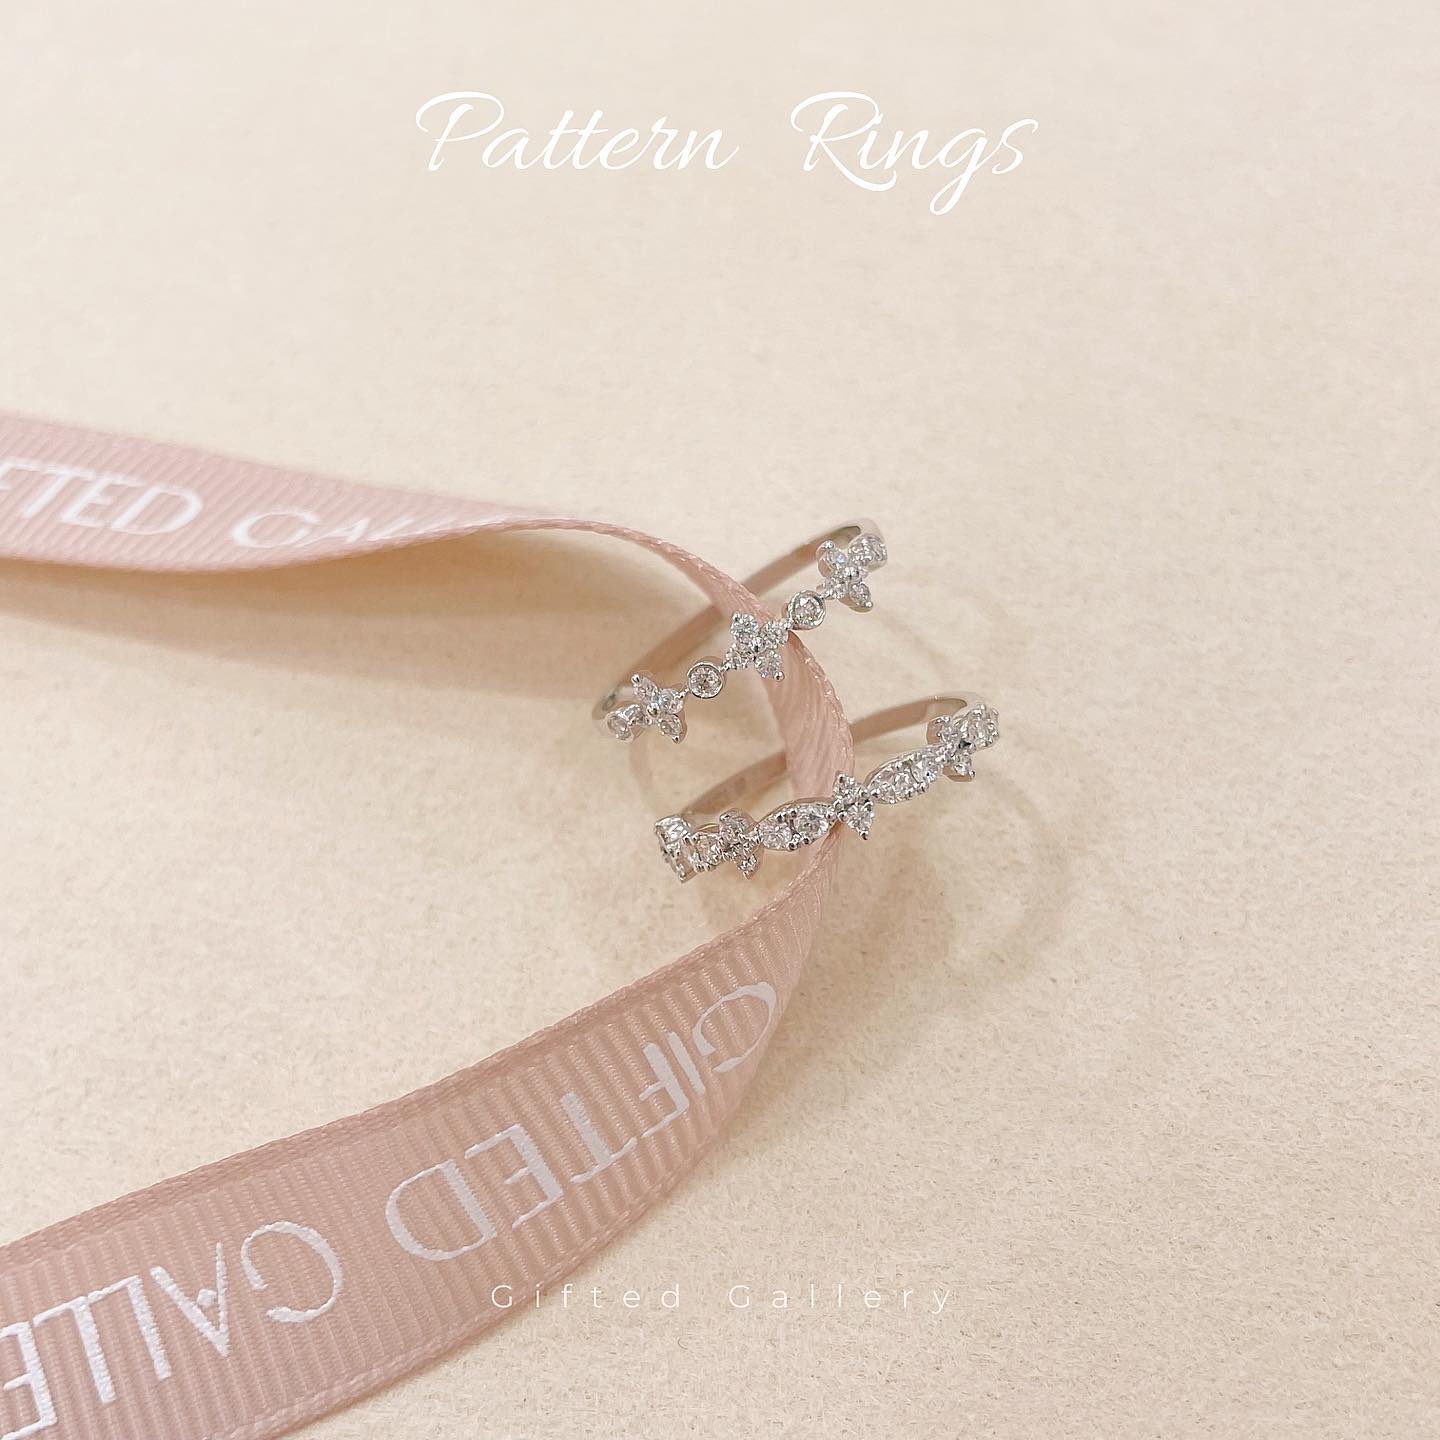 Diamond Pattern Rings by Gifted Gallery